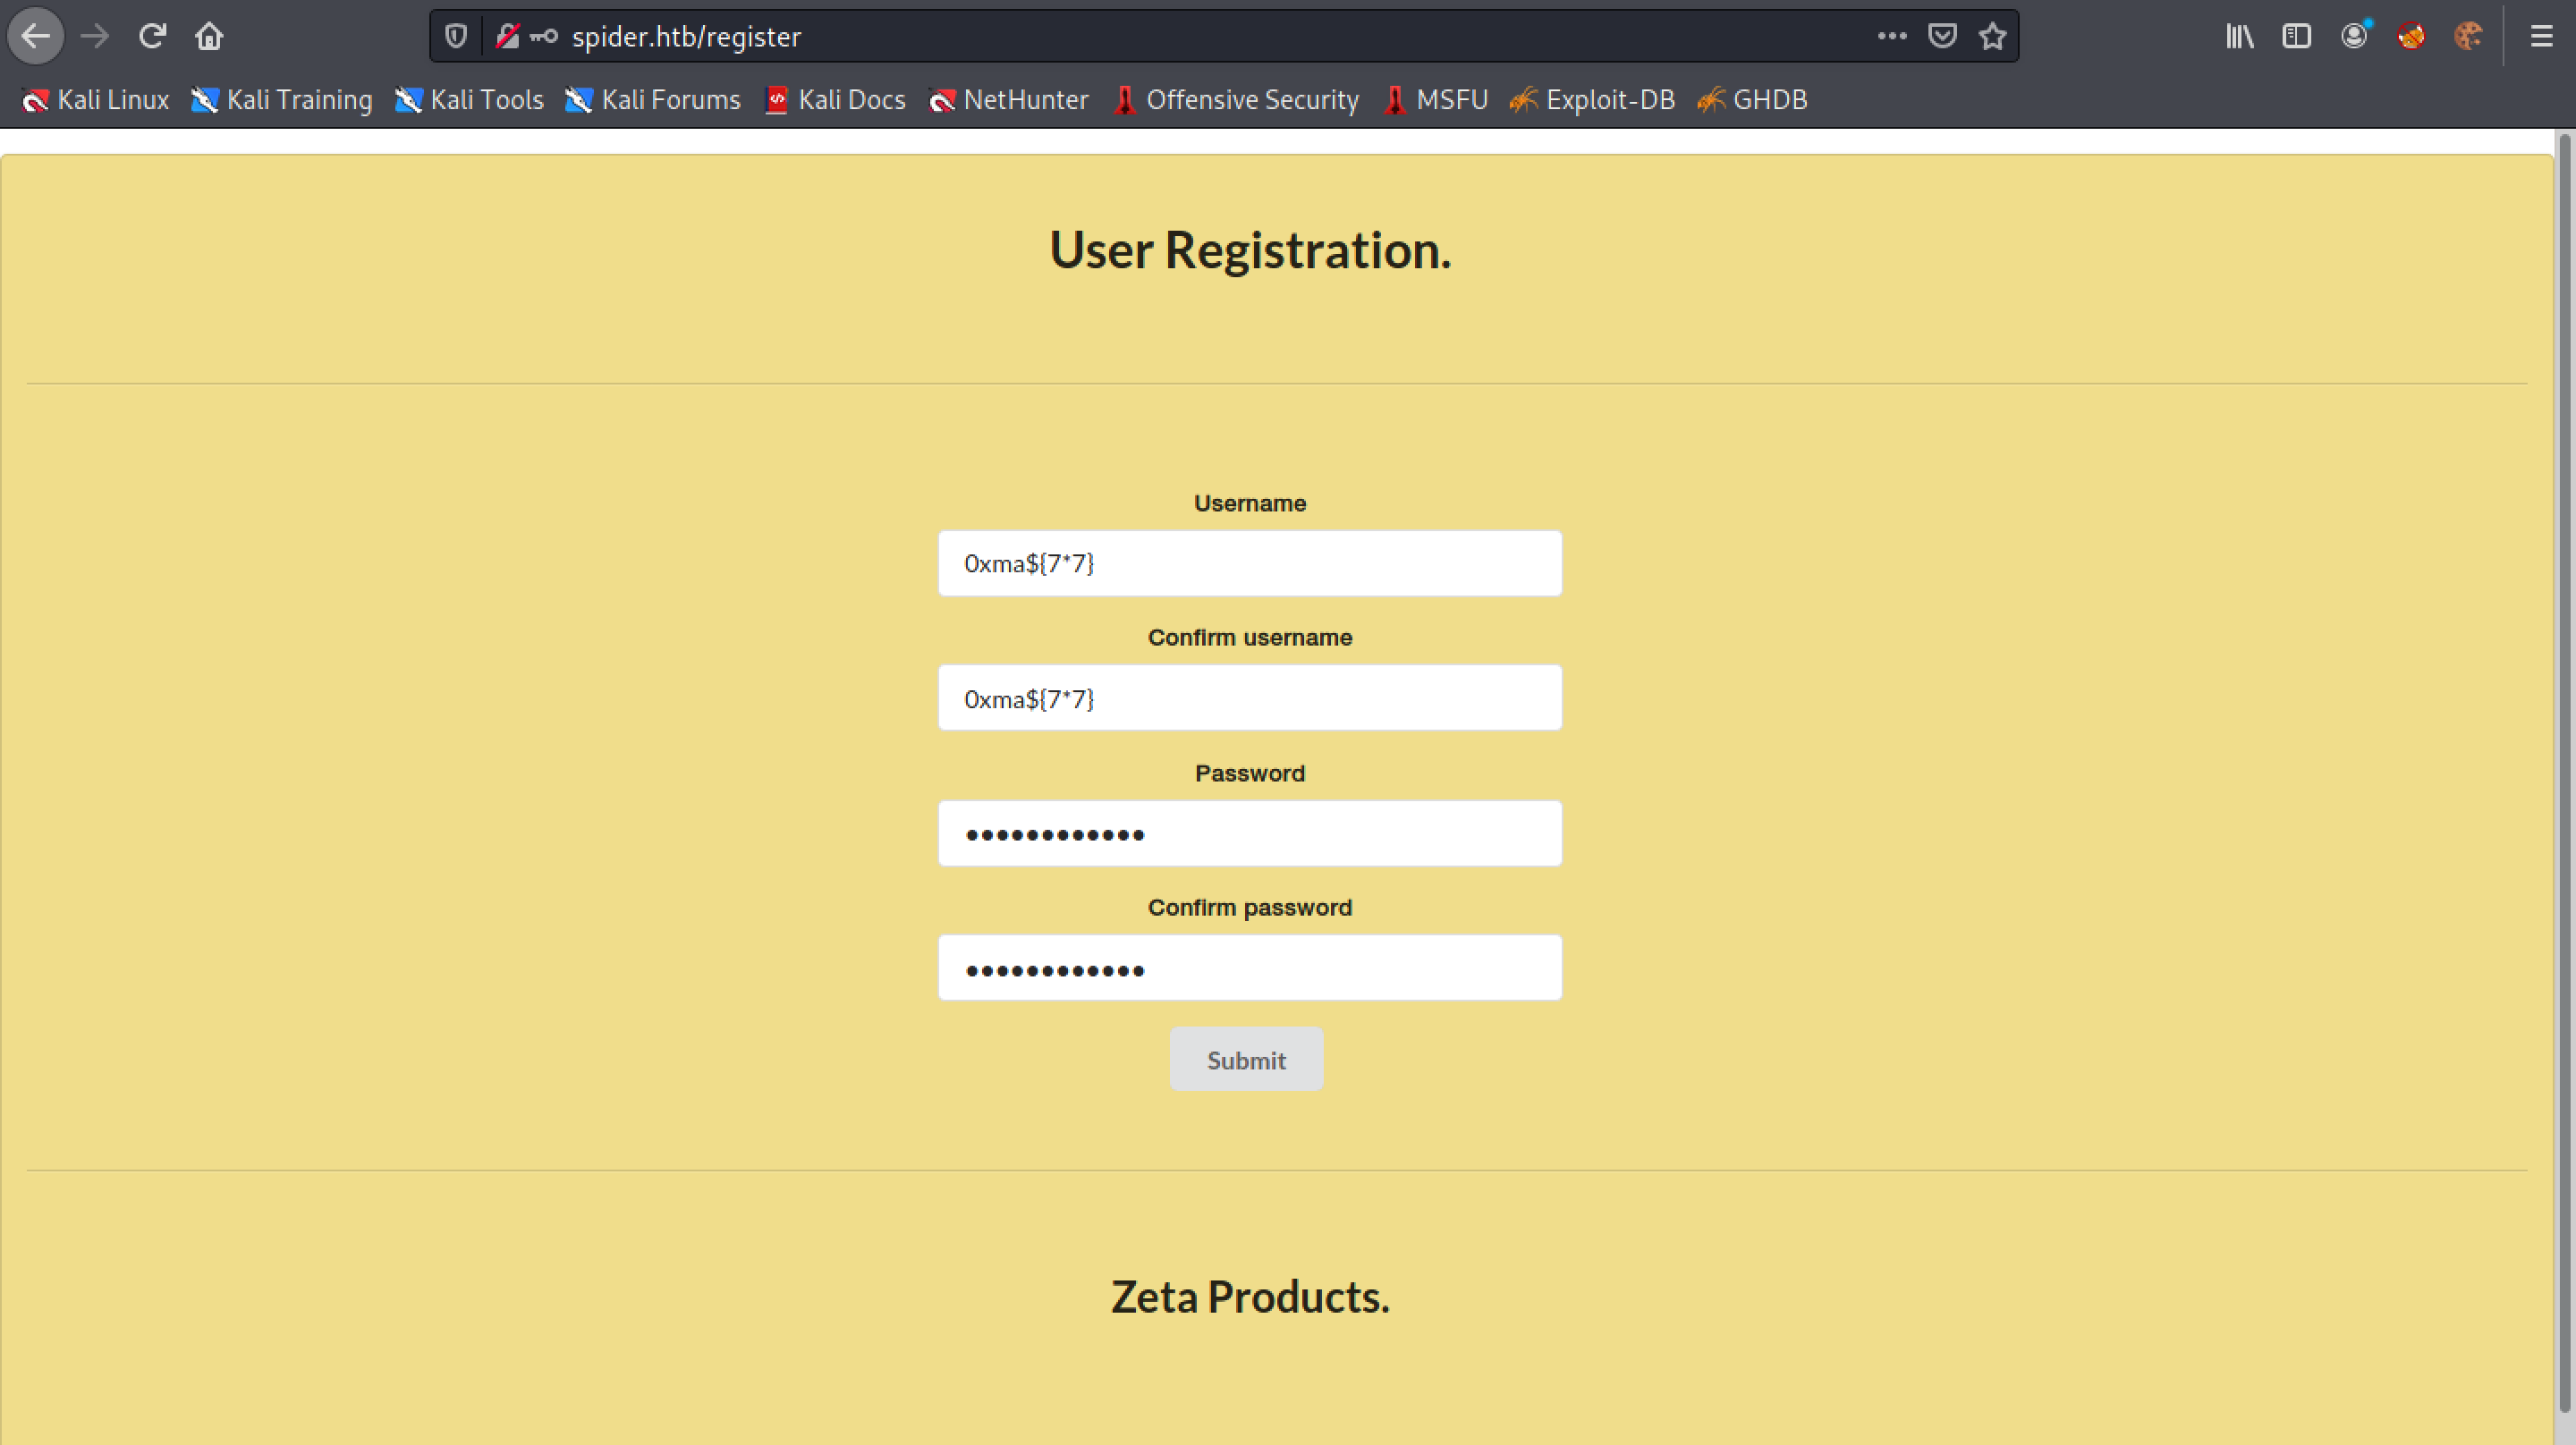 Register a user with SSTI payload.